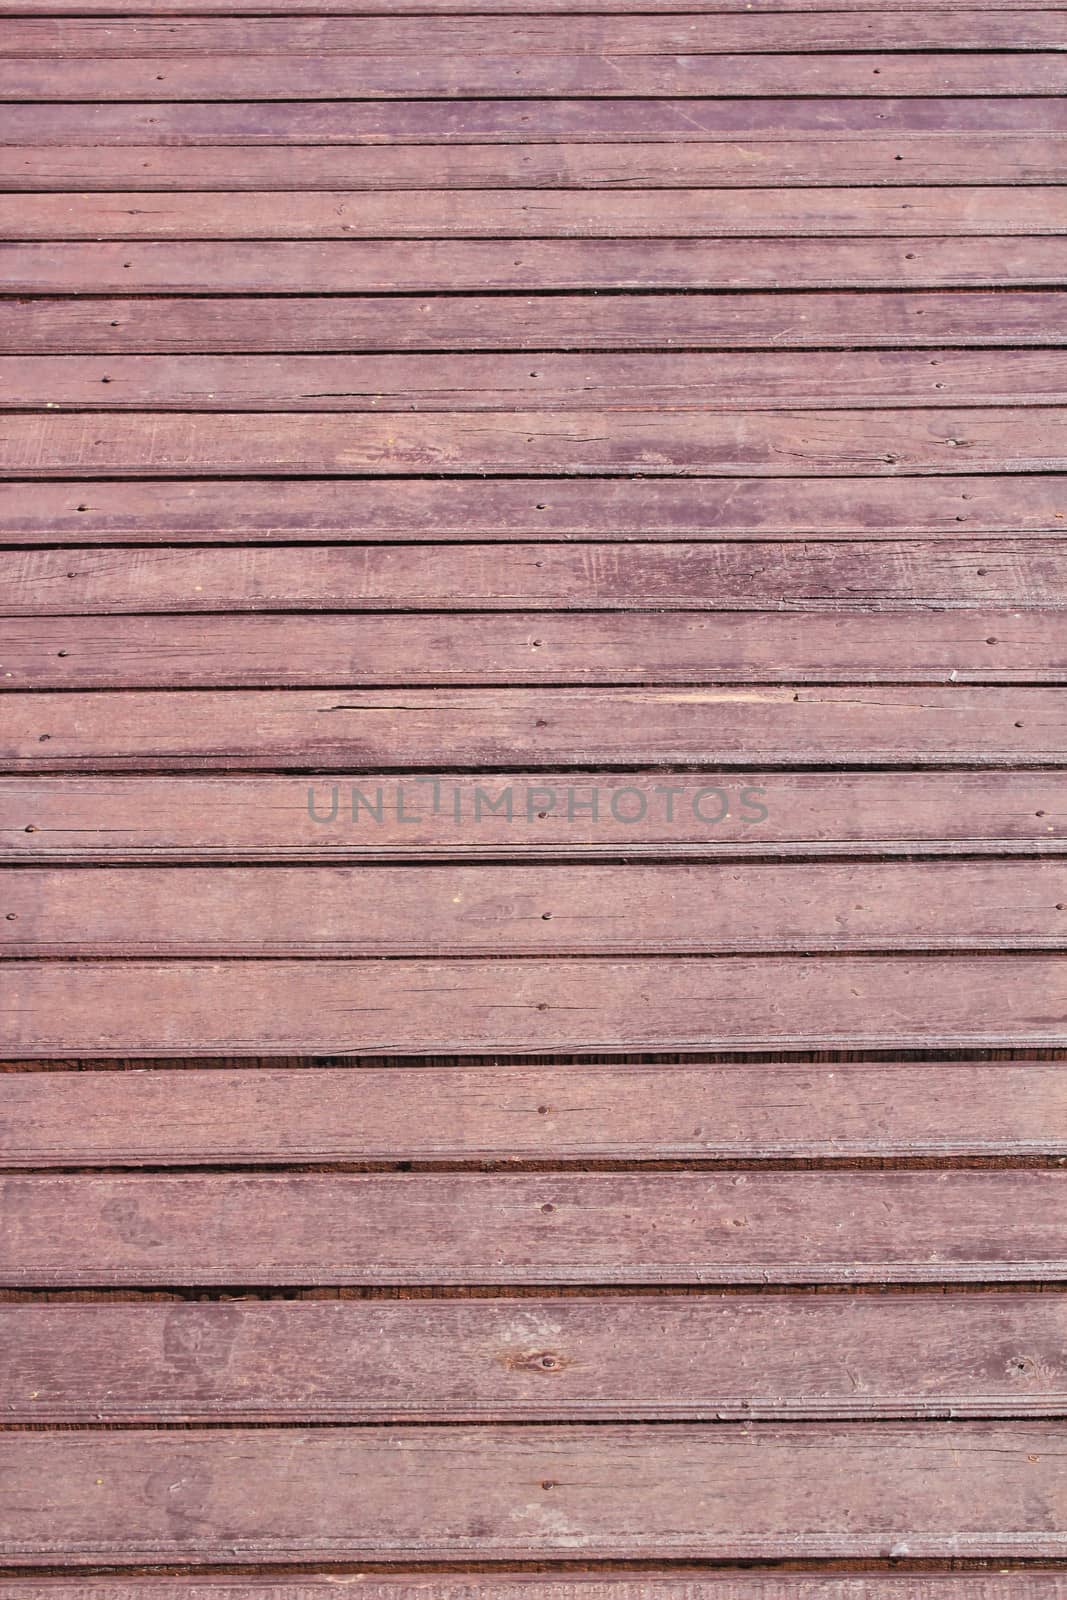 Wooden pattern background comes from bridge